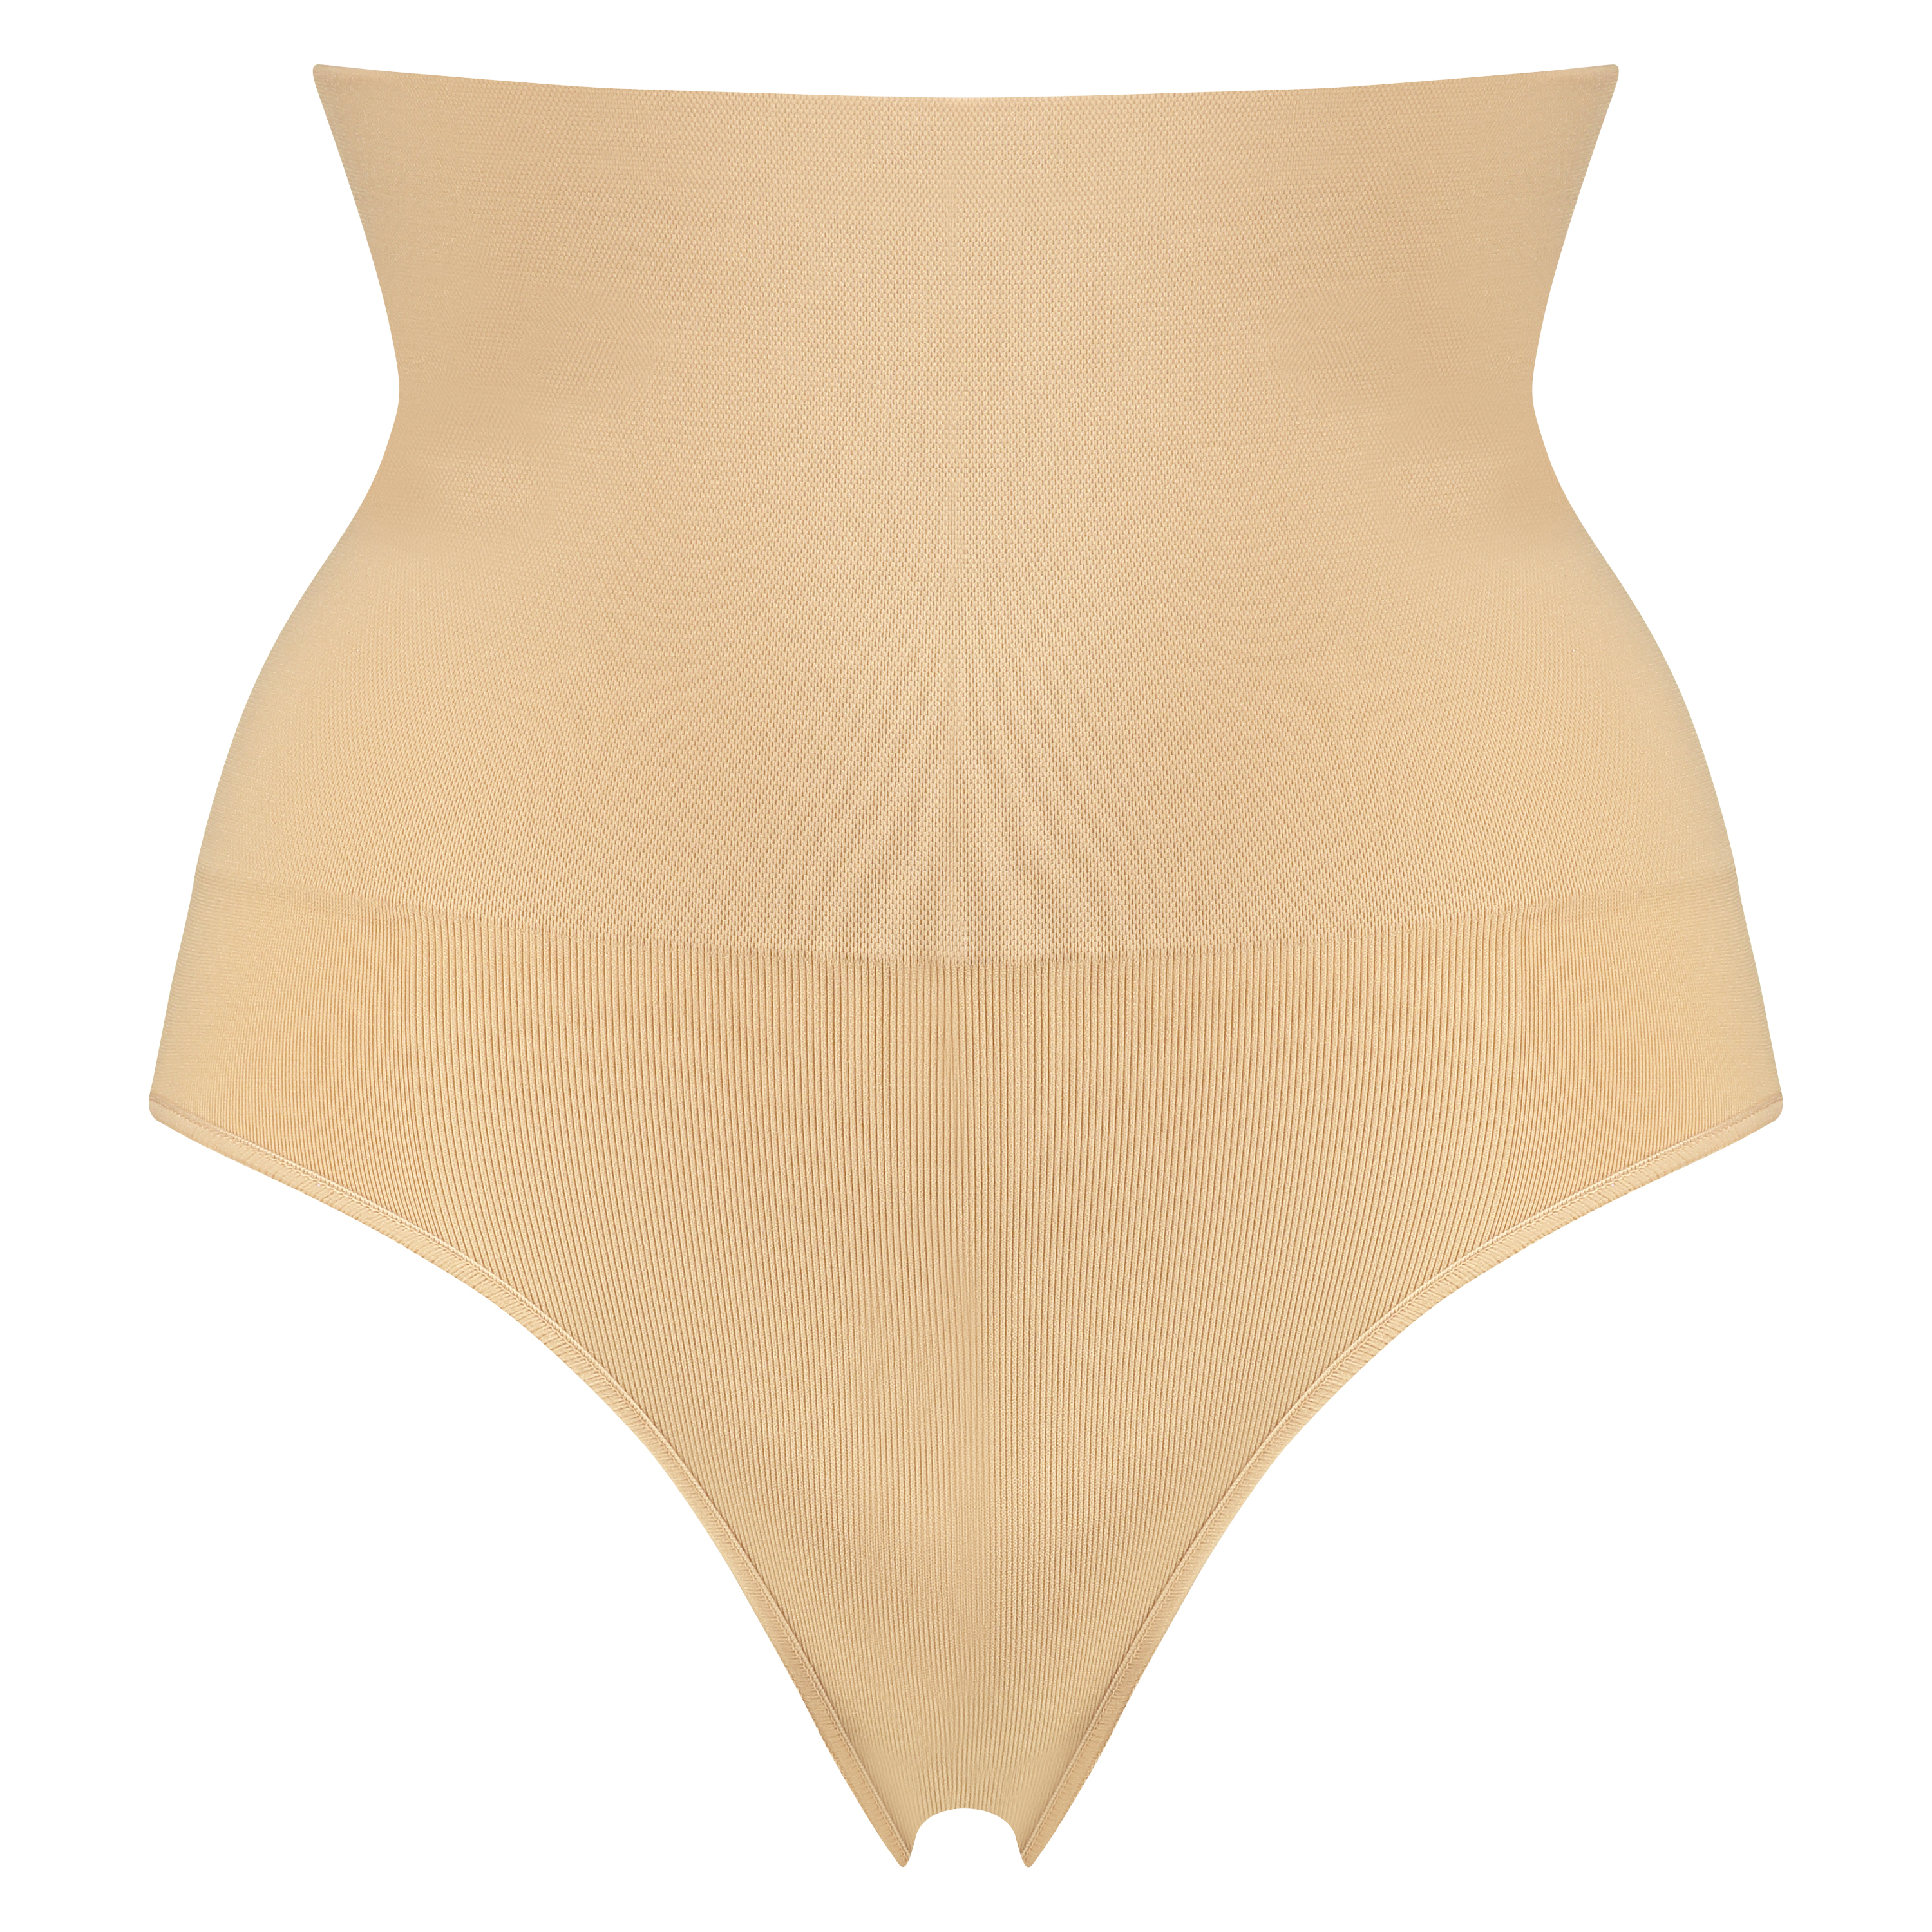 Firming high knickers - Level 2, Beige, main